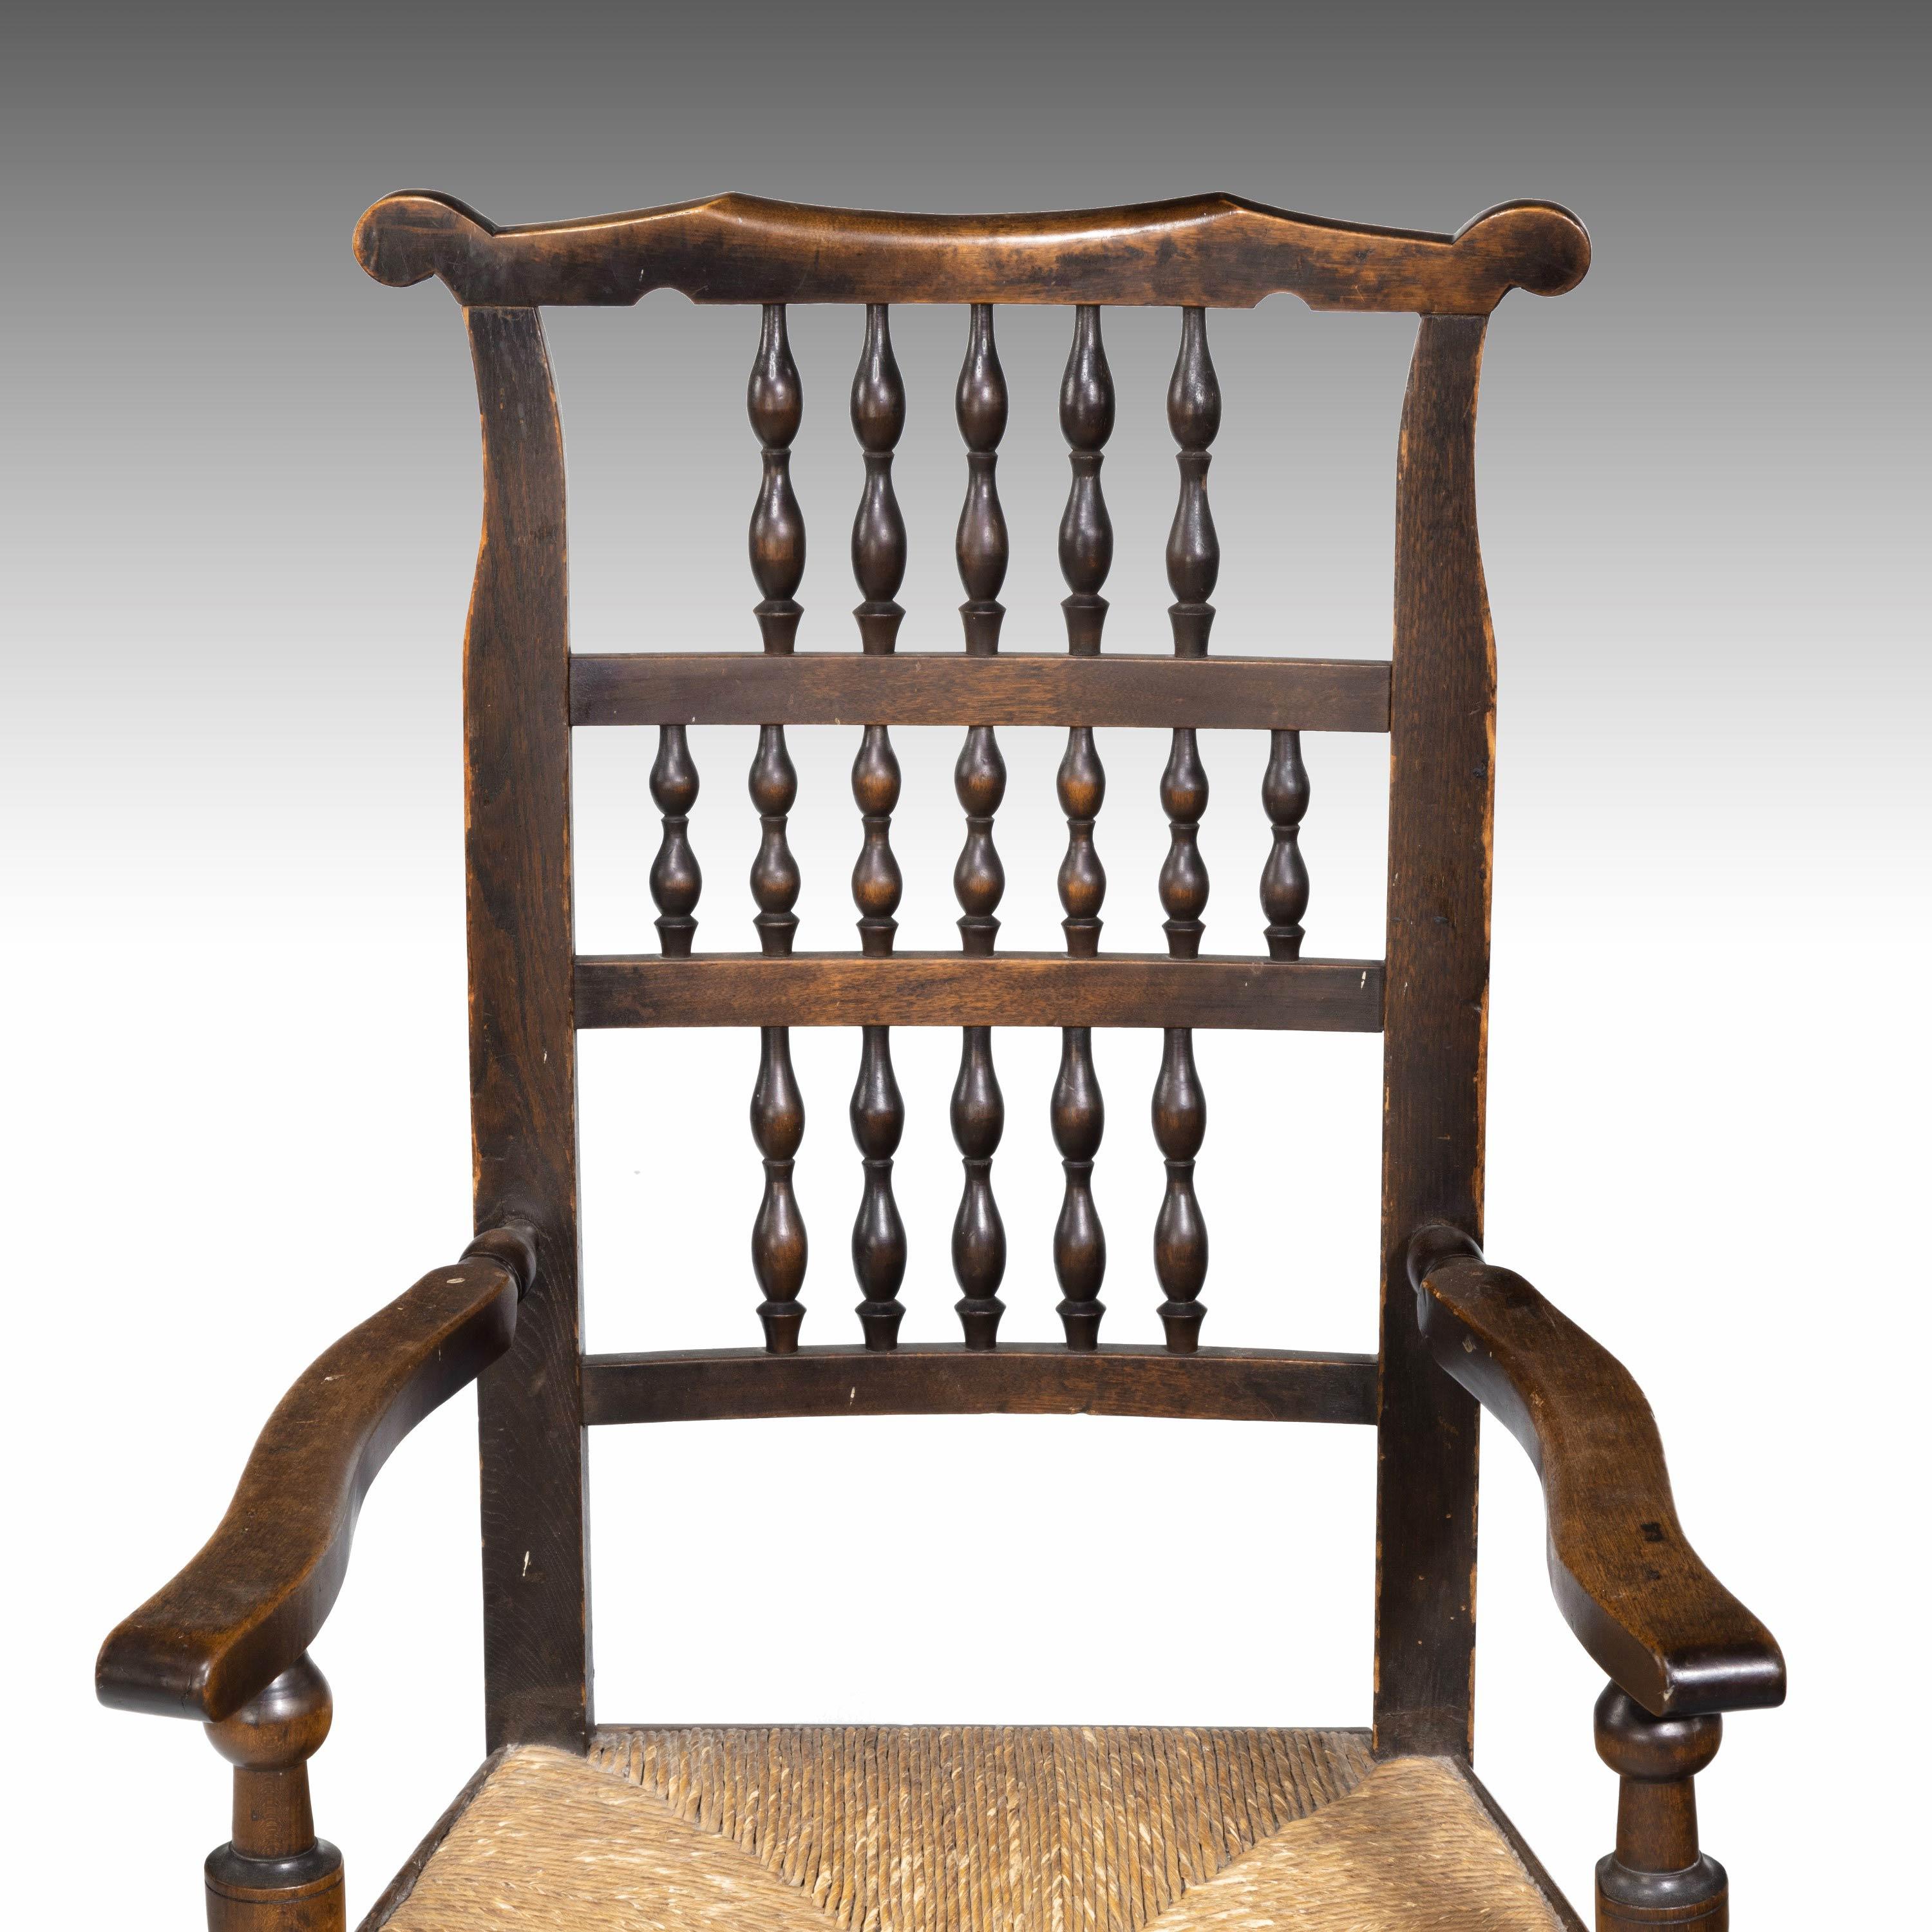 Attractive Mid-19th Century Elm Spindleback Armchair In Good Condition In Peterborough, Northamptonshire